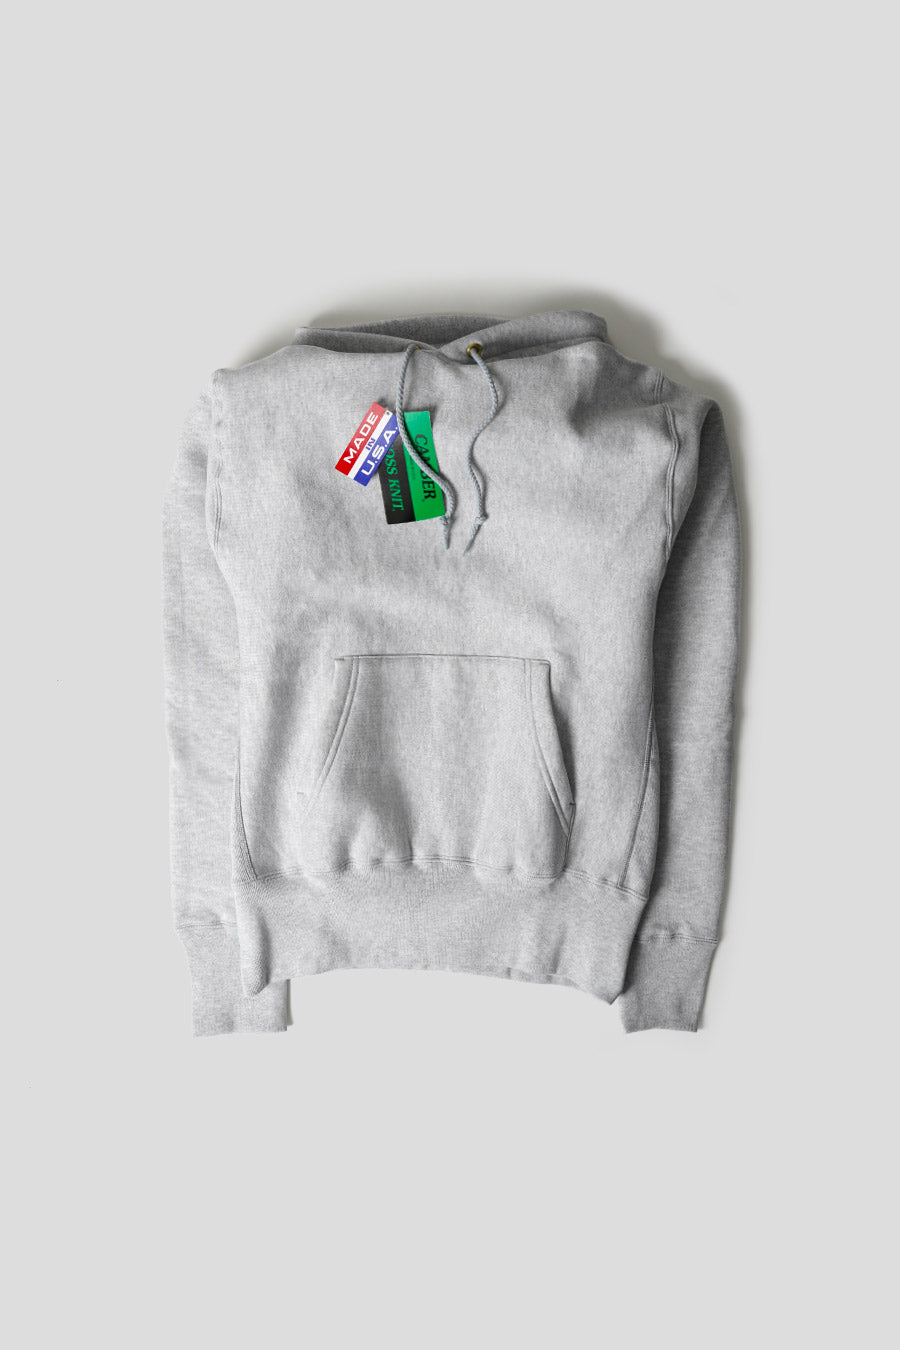 CAMBER USA - CROSS-KNIT HOODIE GREY - LE LABO STORE